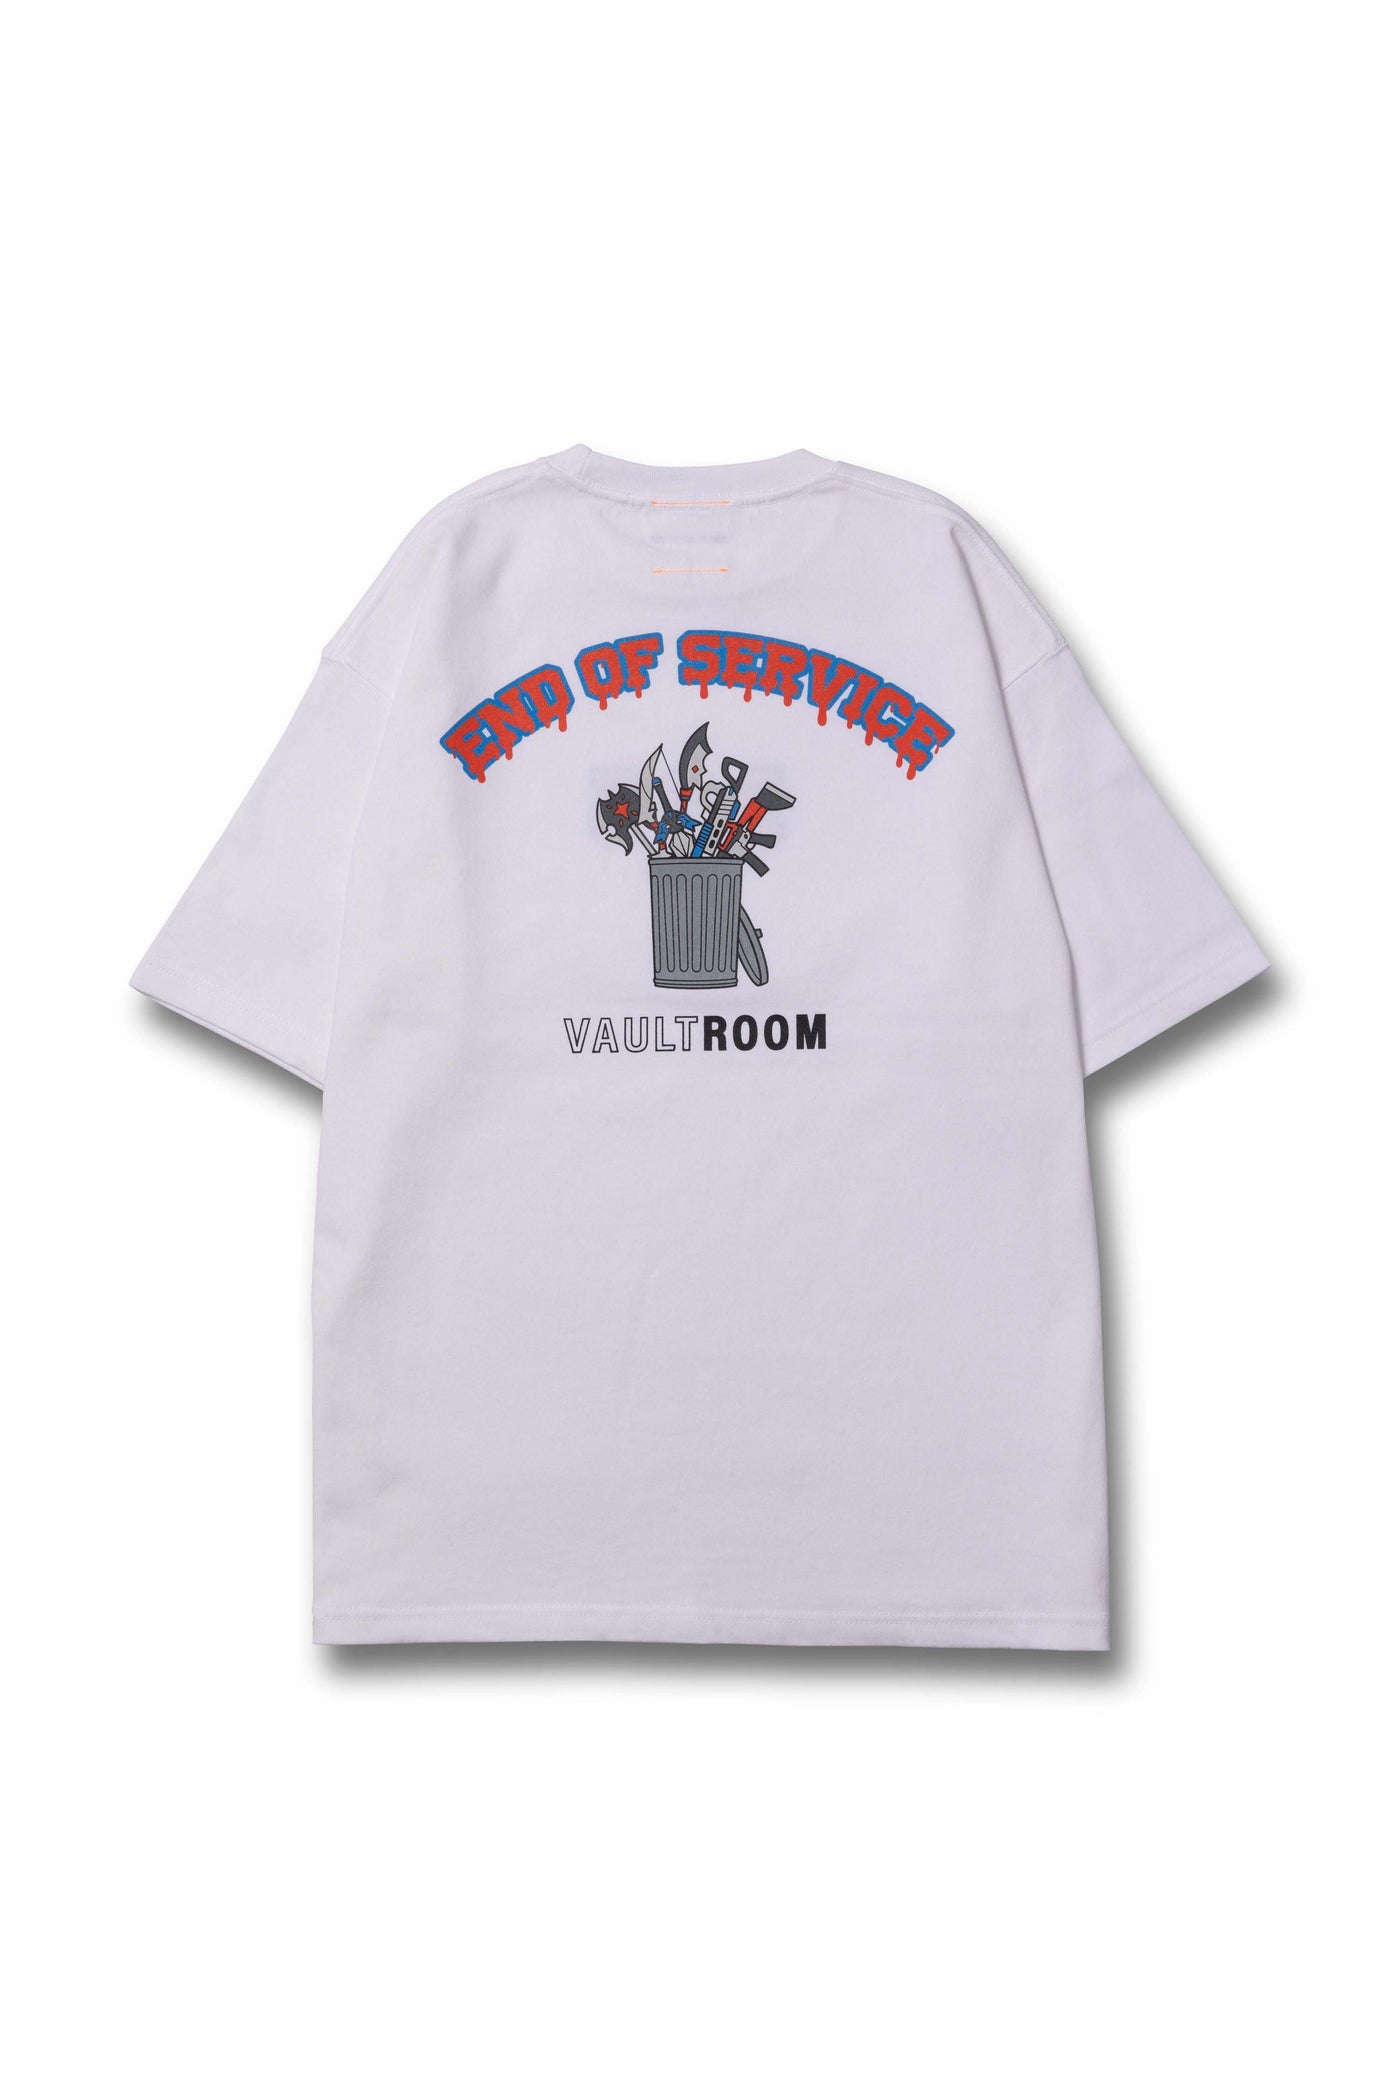 vaultroom THE GAME IS YOURS TEE L ボルトルーム